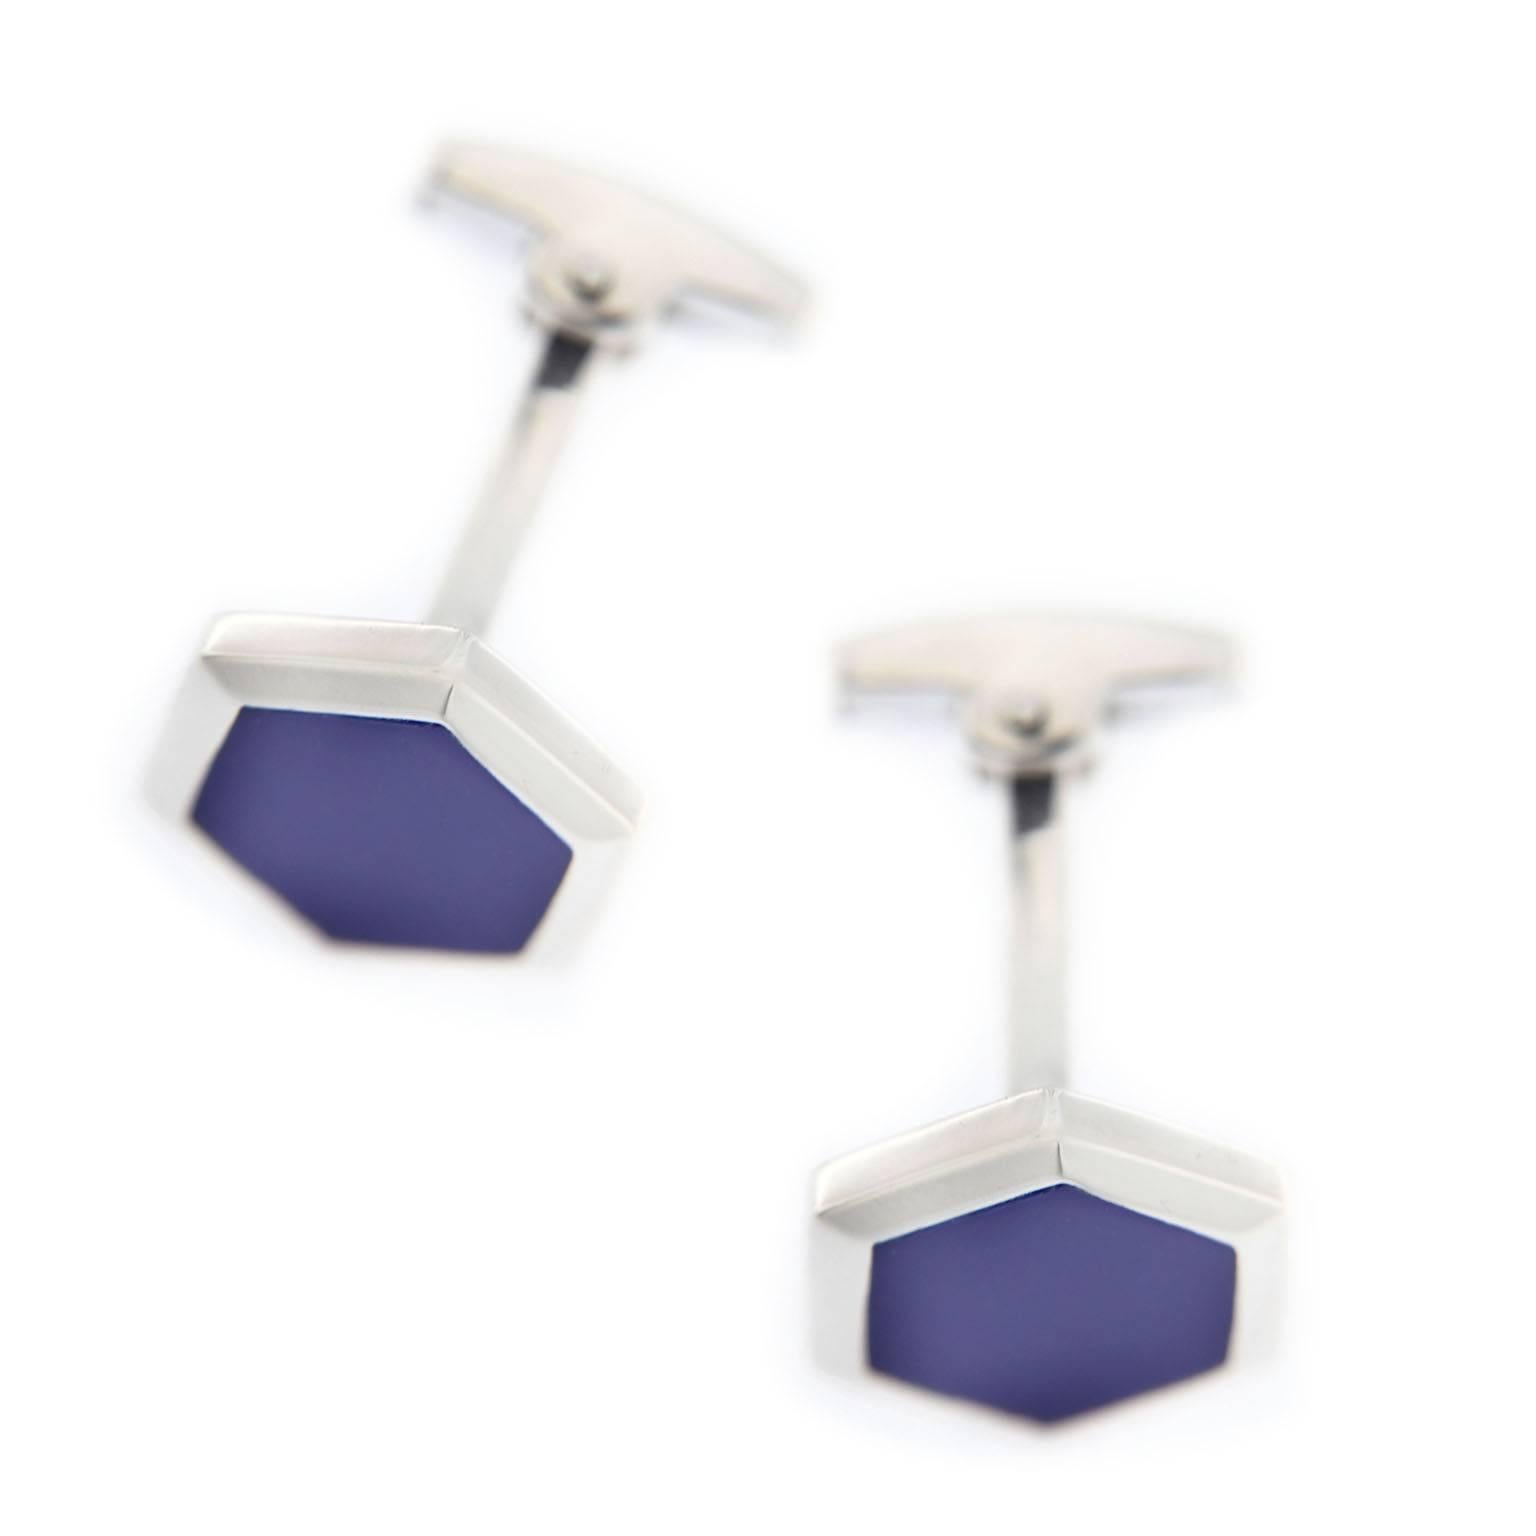 Jona design collection, hand crafted in Italy, 925/°°° sterling silver cufflinks with blue enamel. Dimensions: 0.59